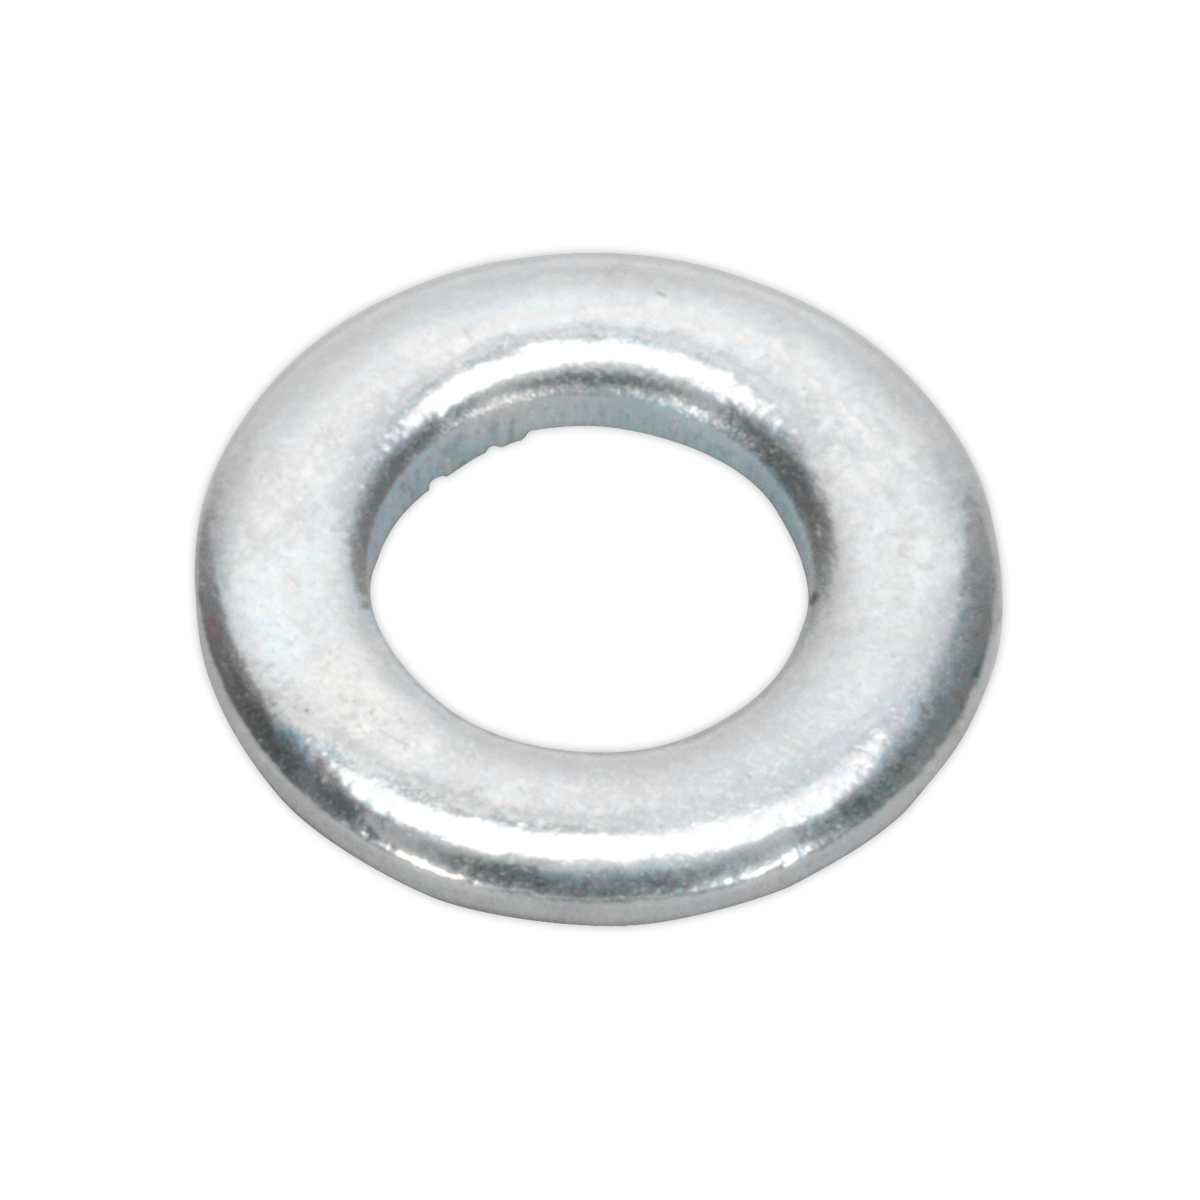 Sealey Flat Washer DIN 125 - M5 x 10mm Form A Zinc Pack of 100